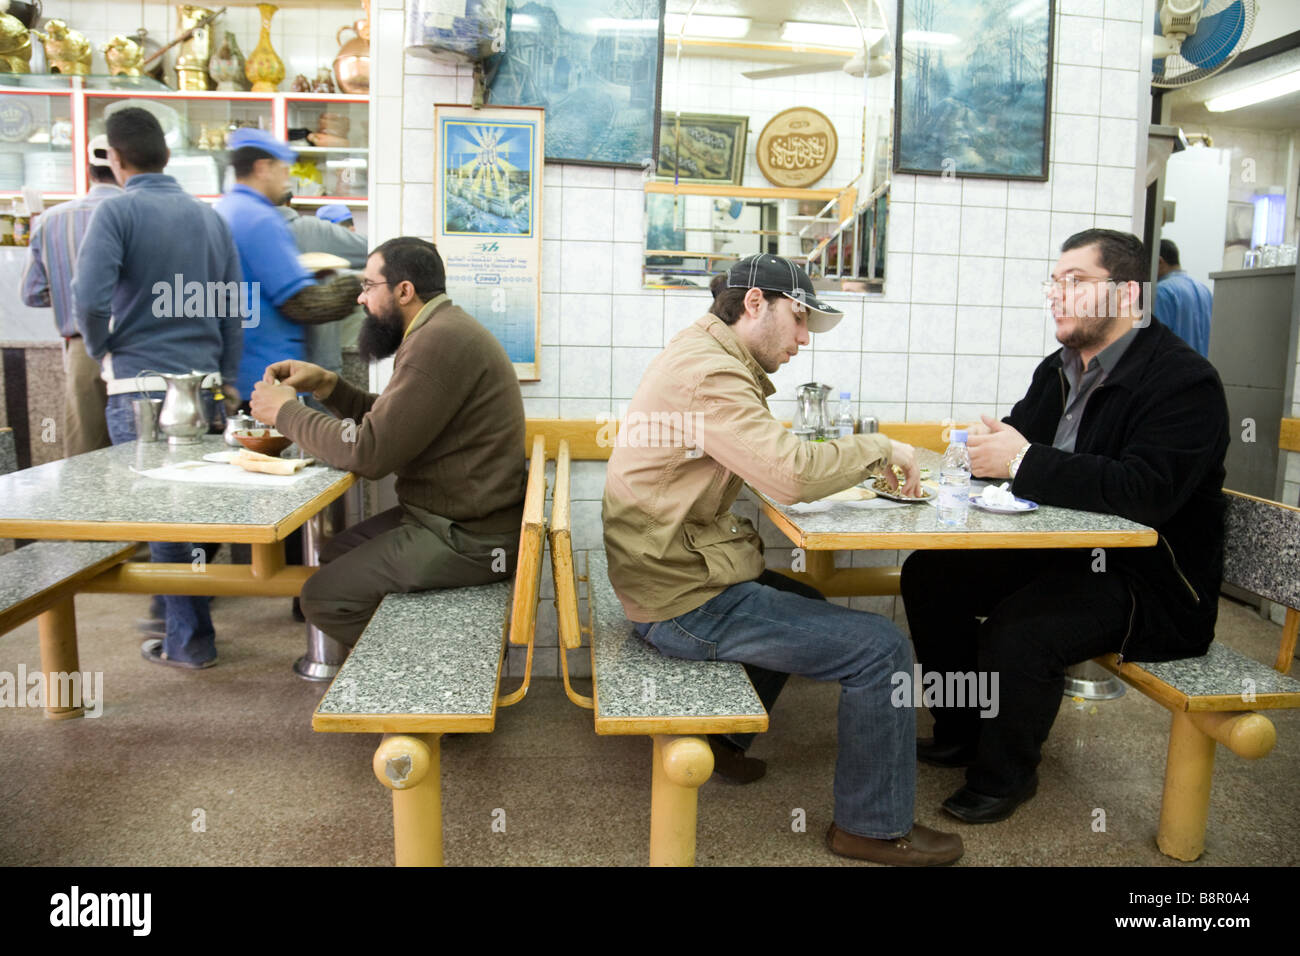 local people eating in a restaurant, Amman, Jordan, Middle East Stock Photo